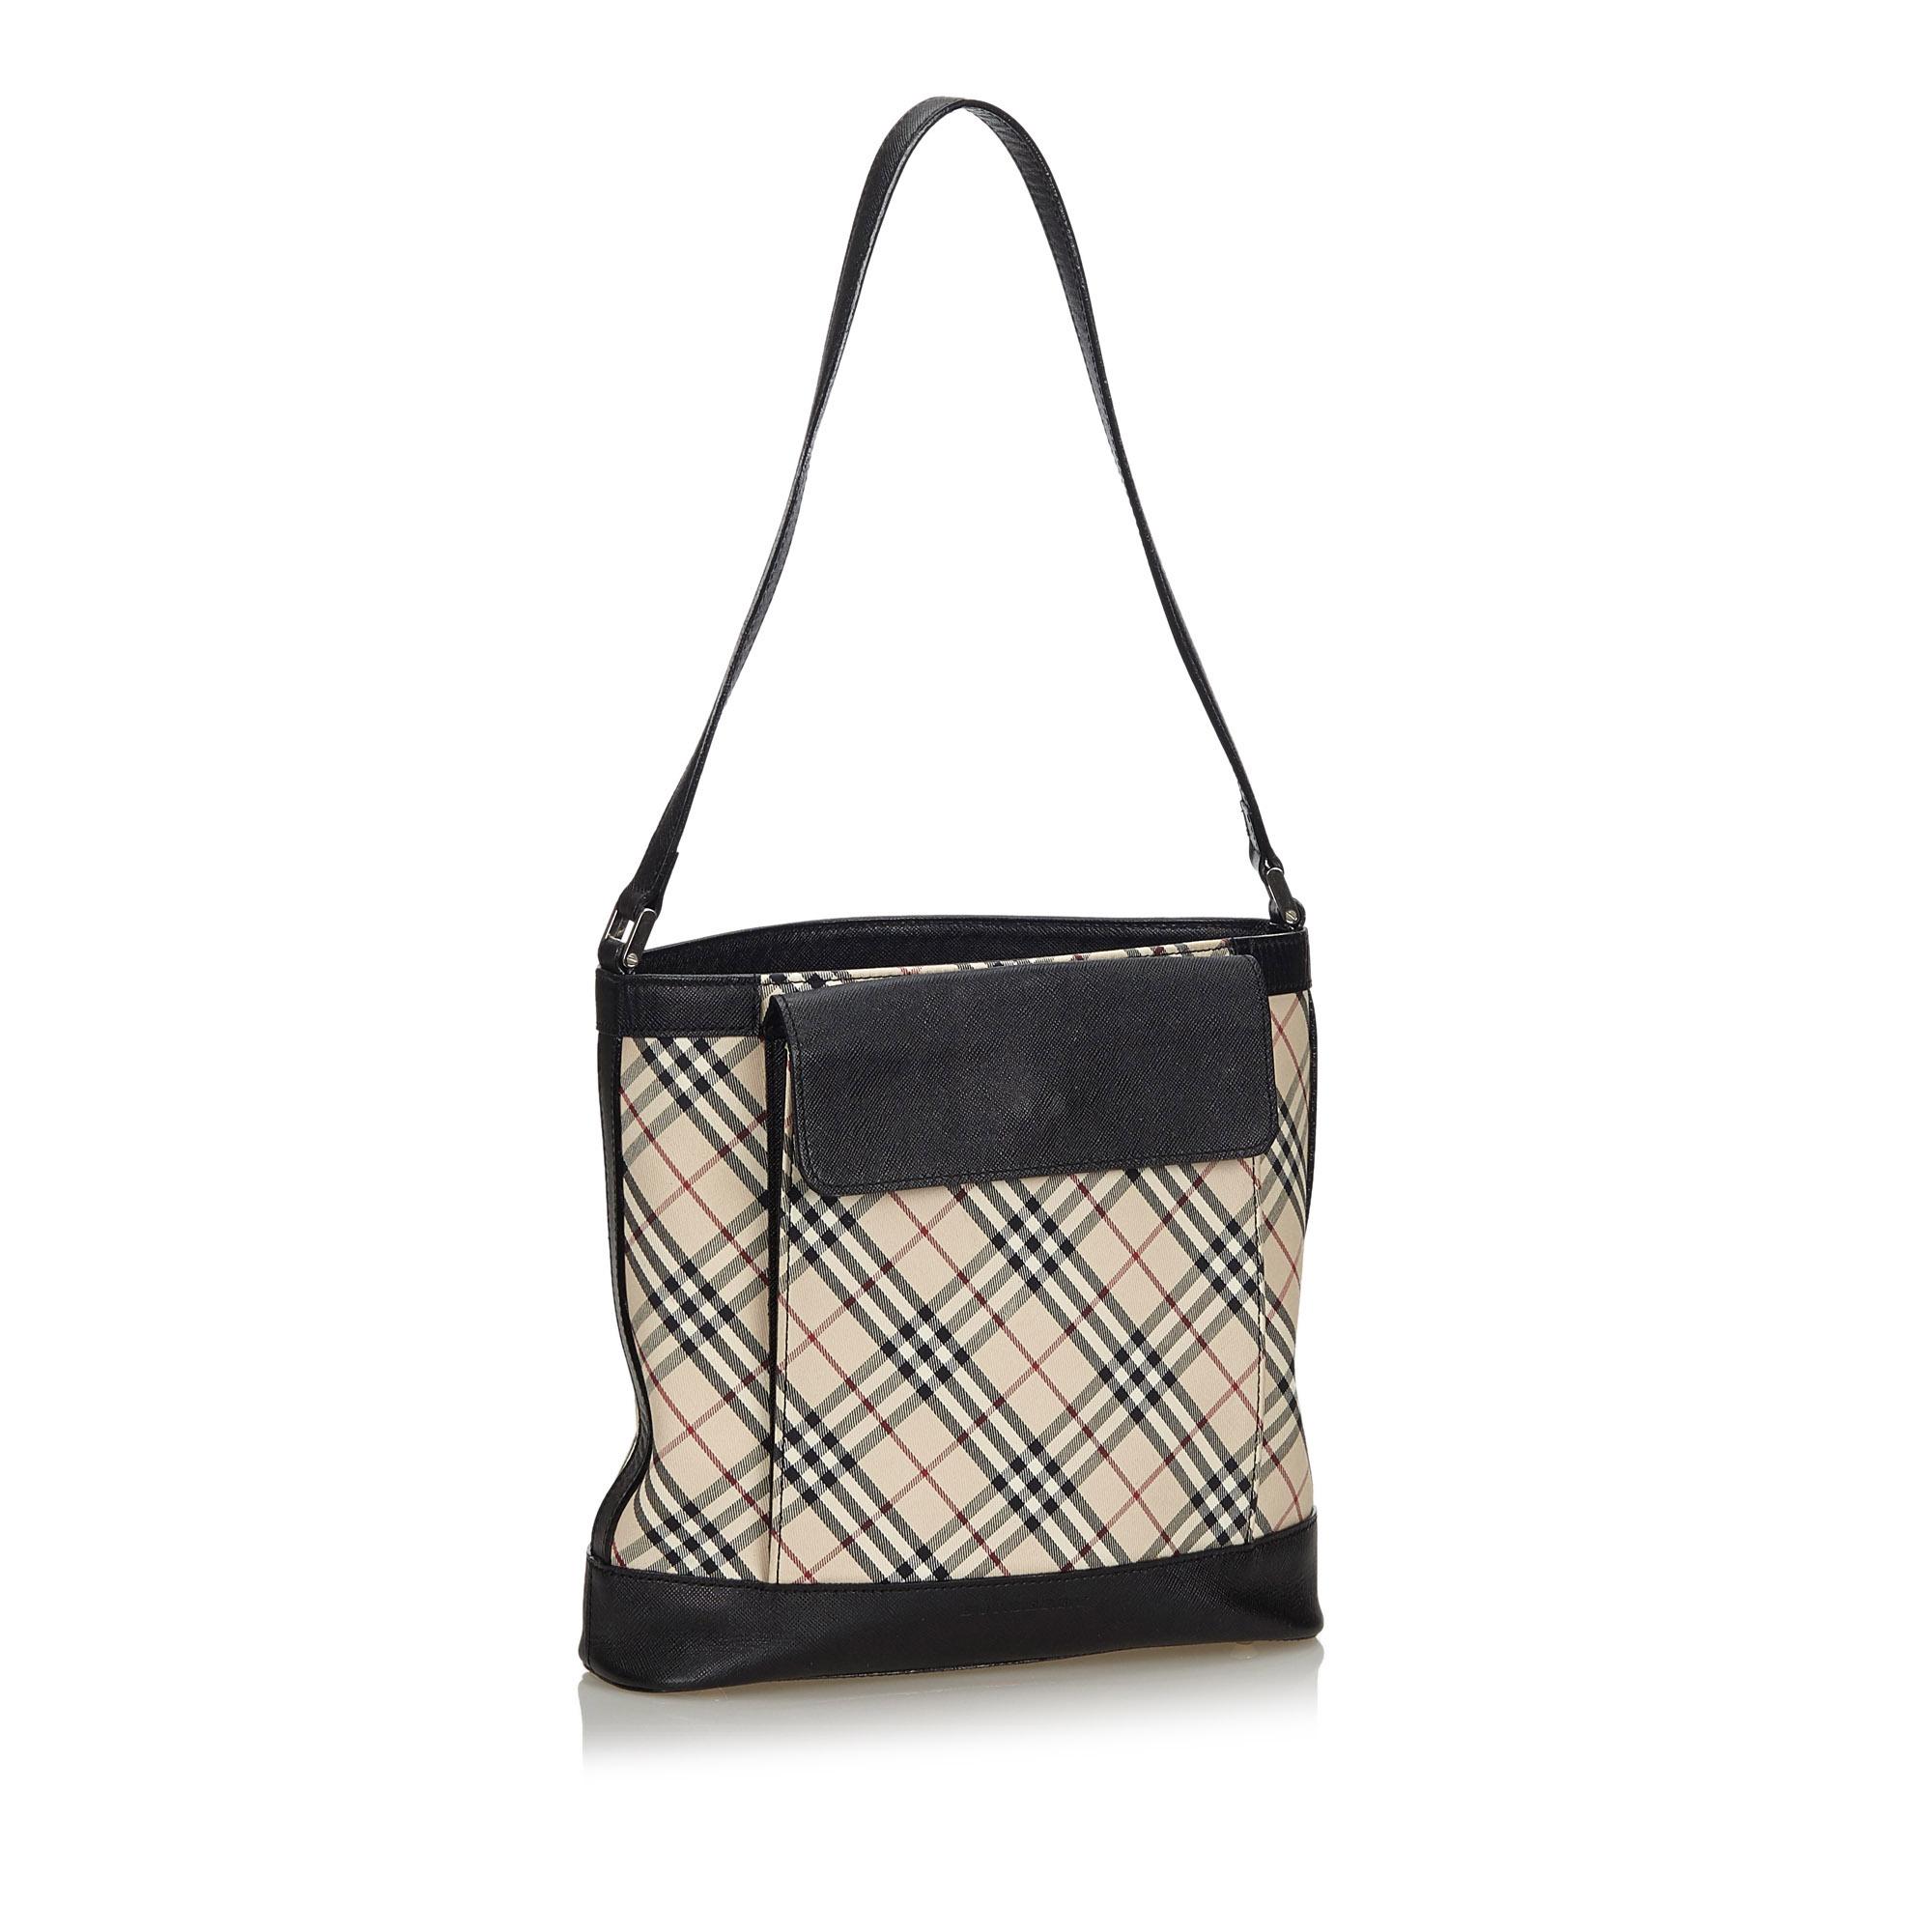 This shoulder bag features a plaid canvas body with leather trim, a front exterior flap pocket, a flat leather strap, a top zip closure, and interior zip and slip pockets. It carries as A condition rating.

Inclusions: 
This item does not come with